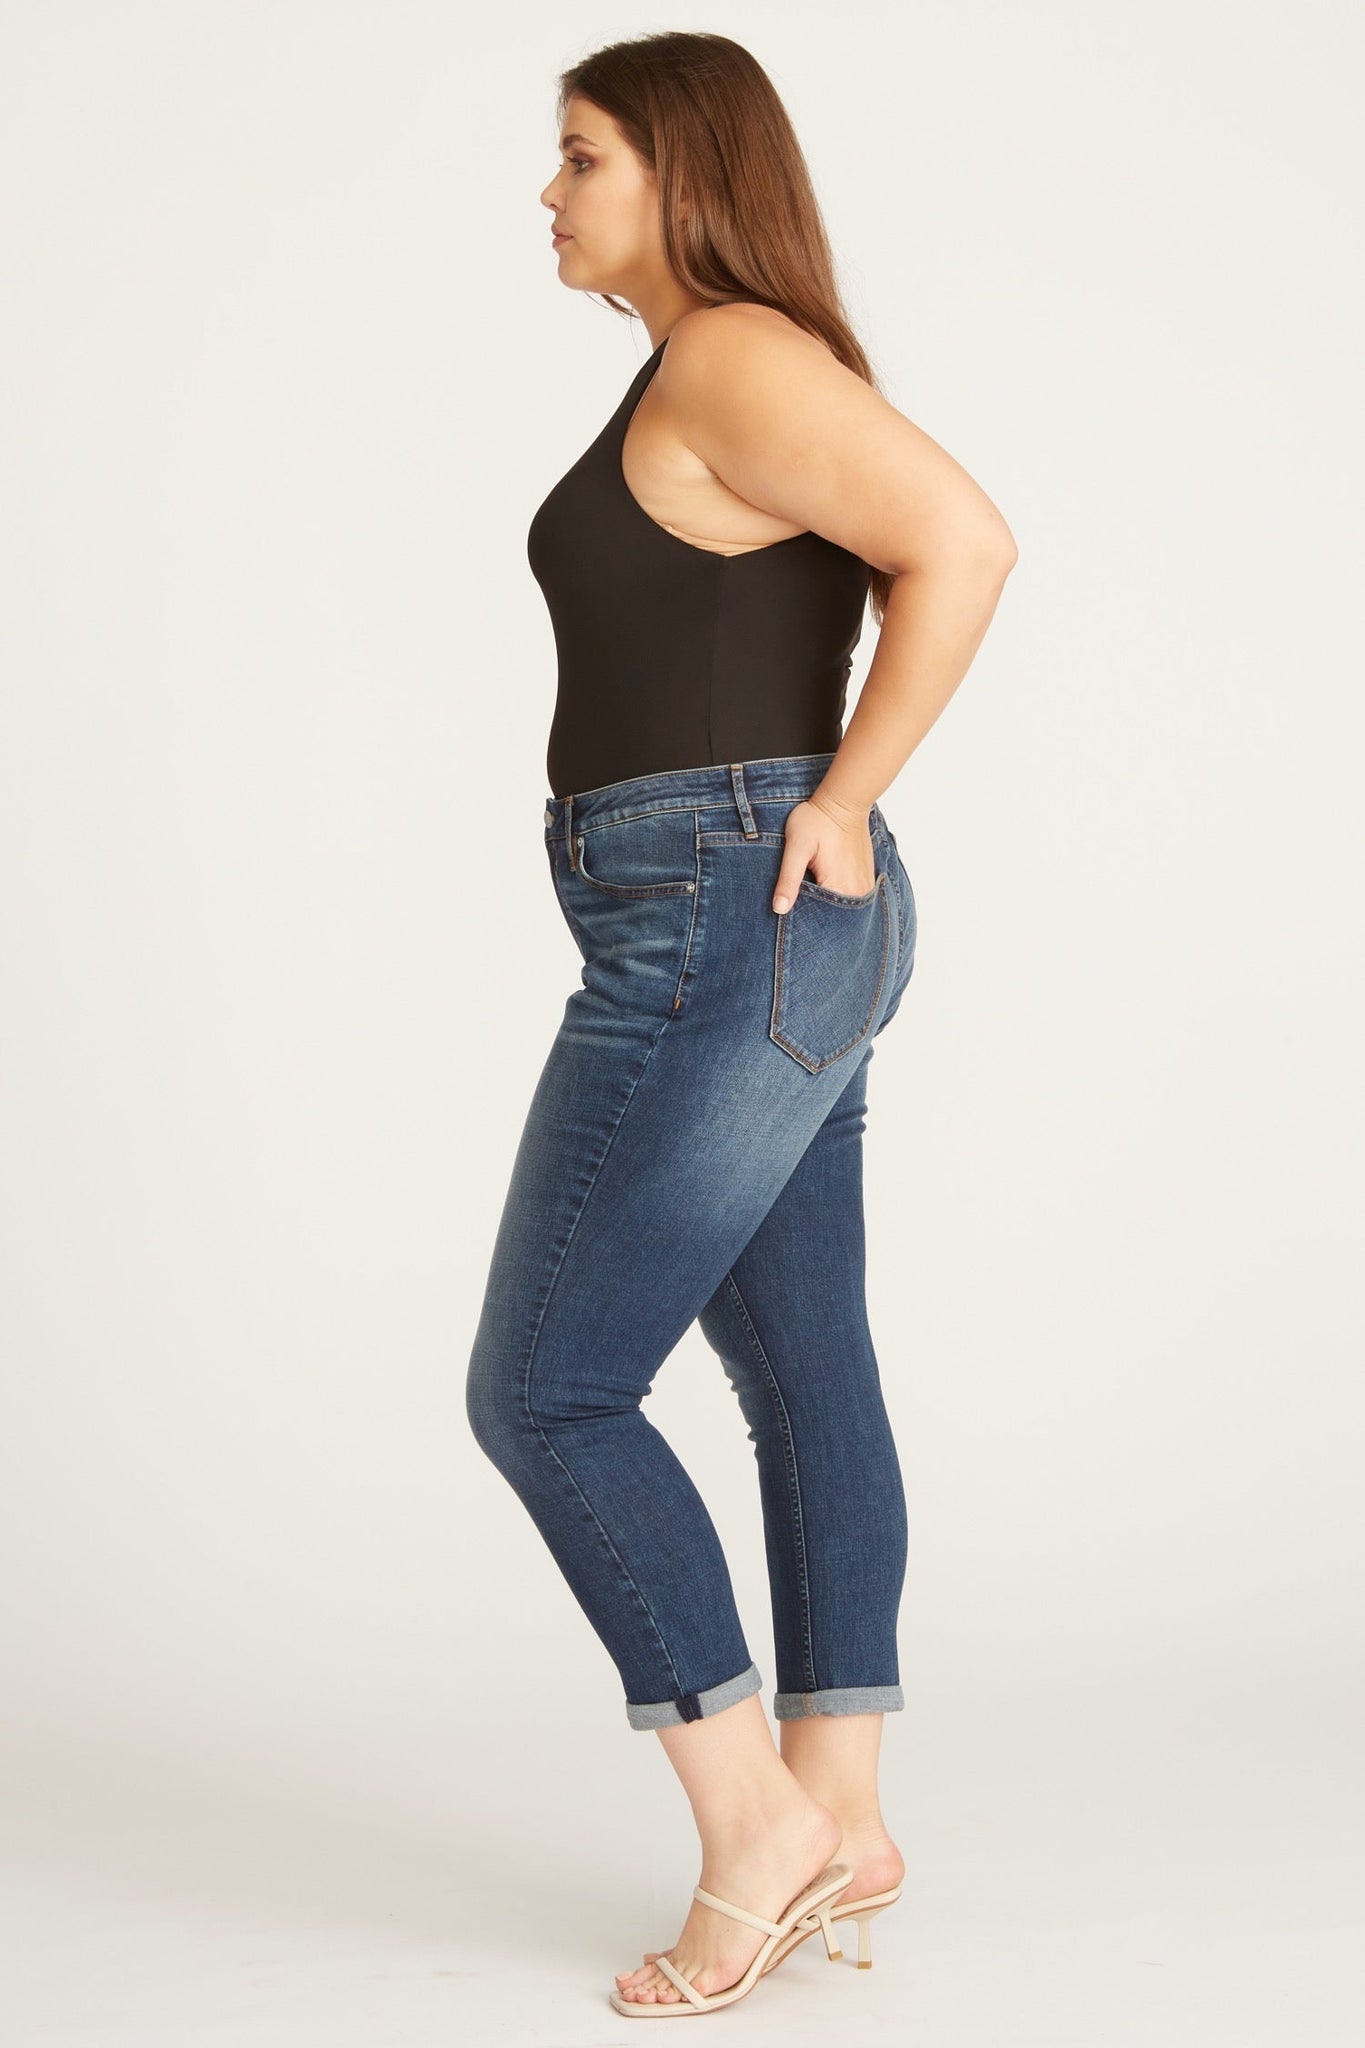 Load image into Gallery viewer, Thompson Tomboy Jean [Plus Size] - Dark Wash
